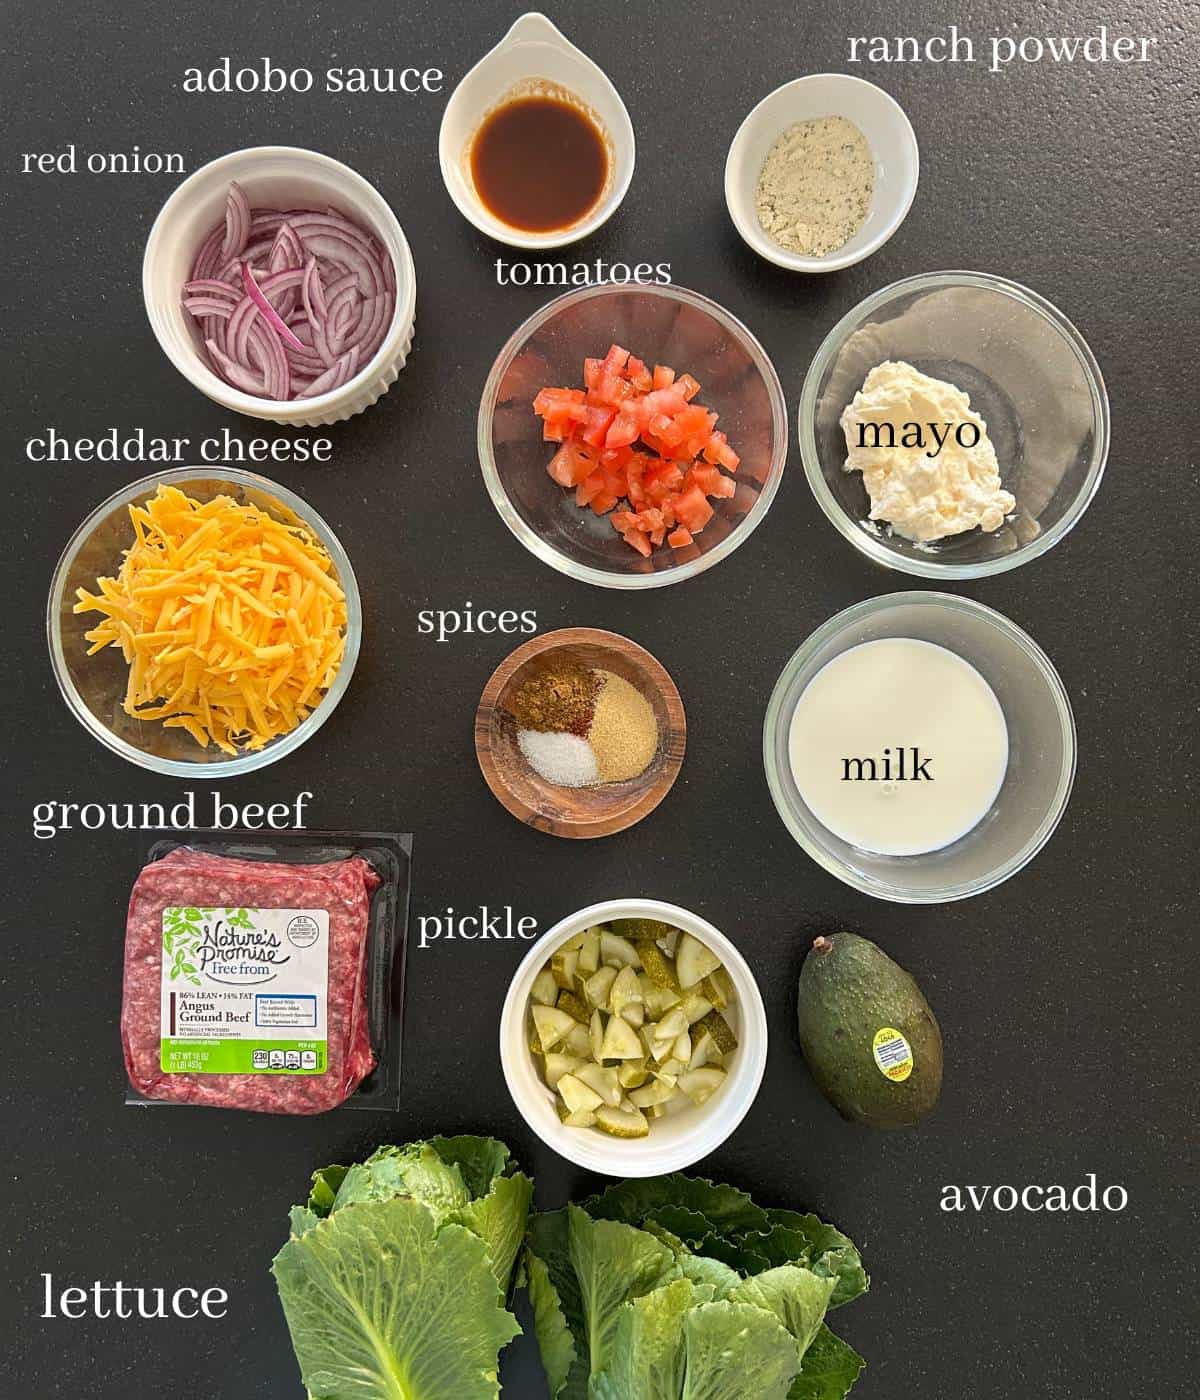 Ingredients for cheeseburger bowls on countertop.